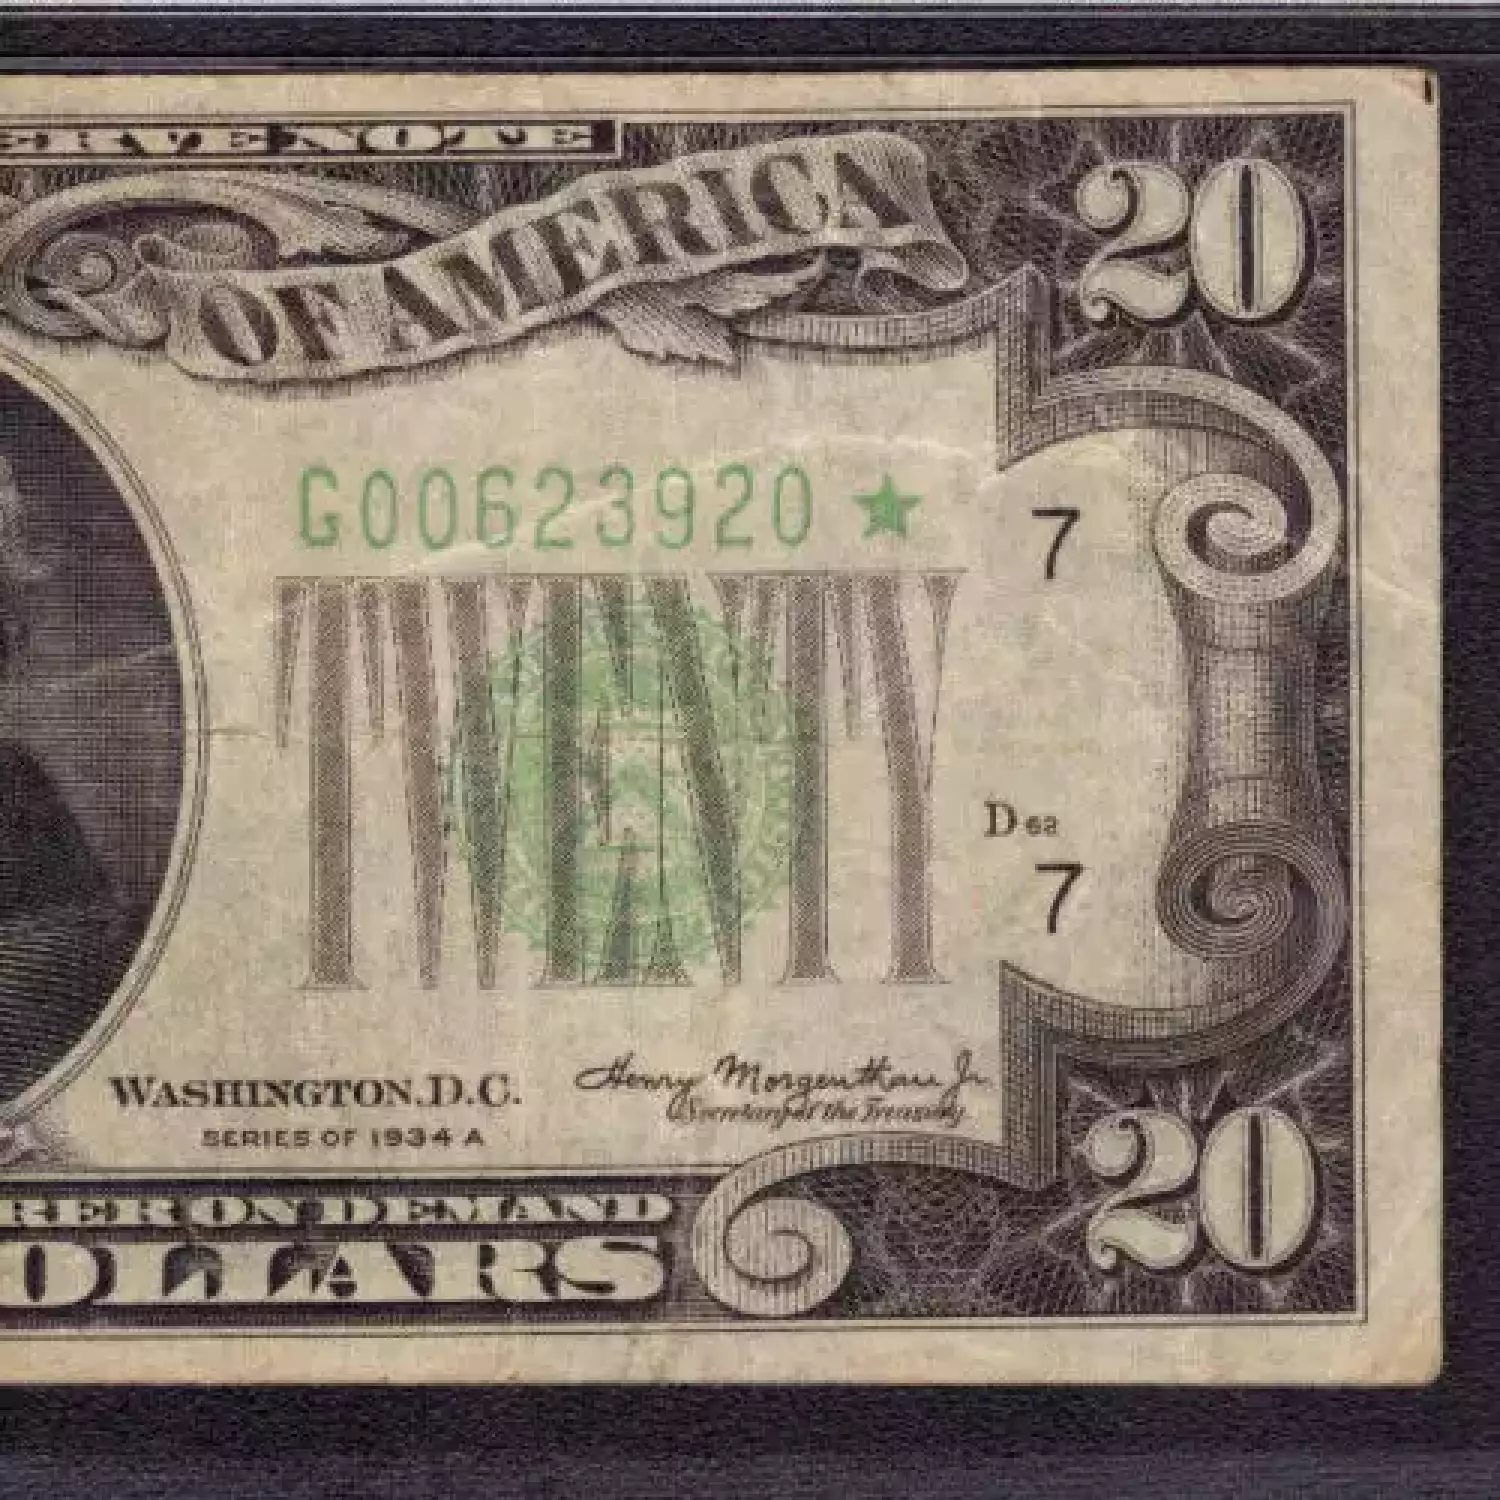 $20 1934-A. blue-Green seal. Small Size $20 Federal Reserve Notes 2055-G* (3)